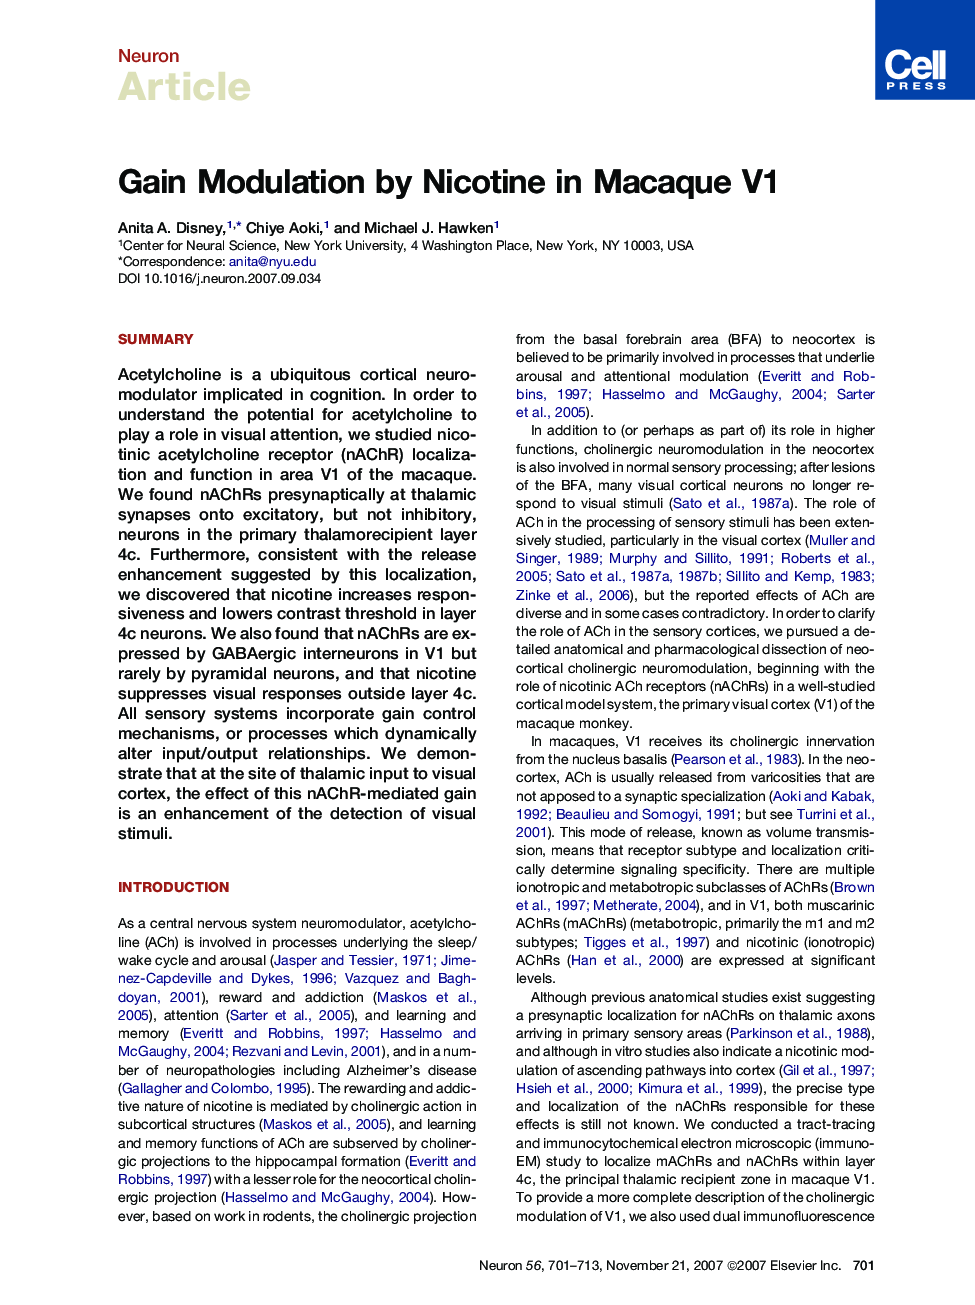 Gain Modulation by Nicotine in Macaque V1